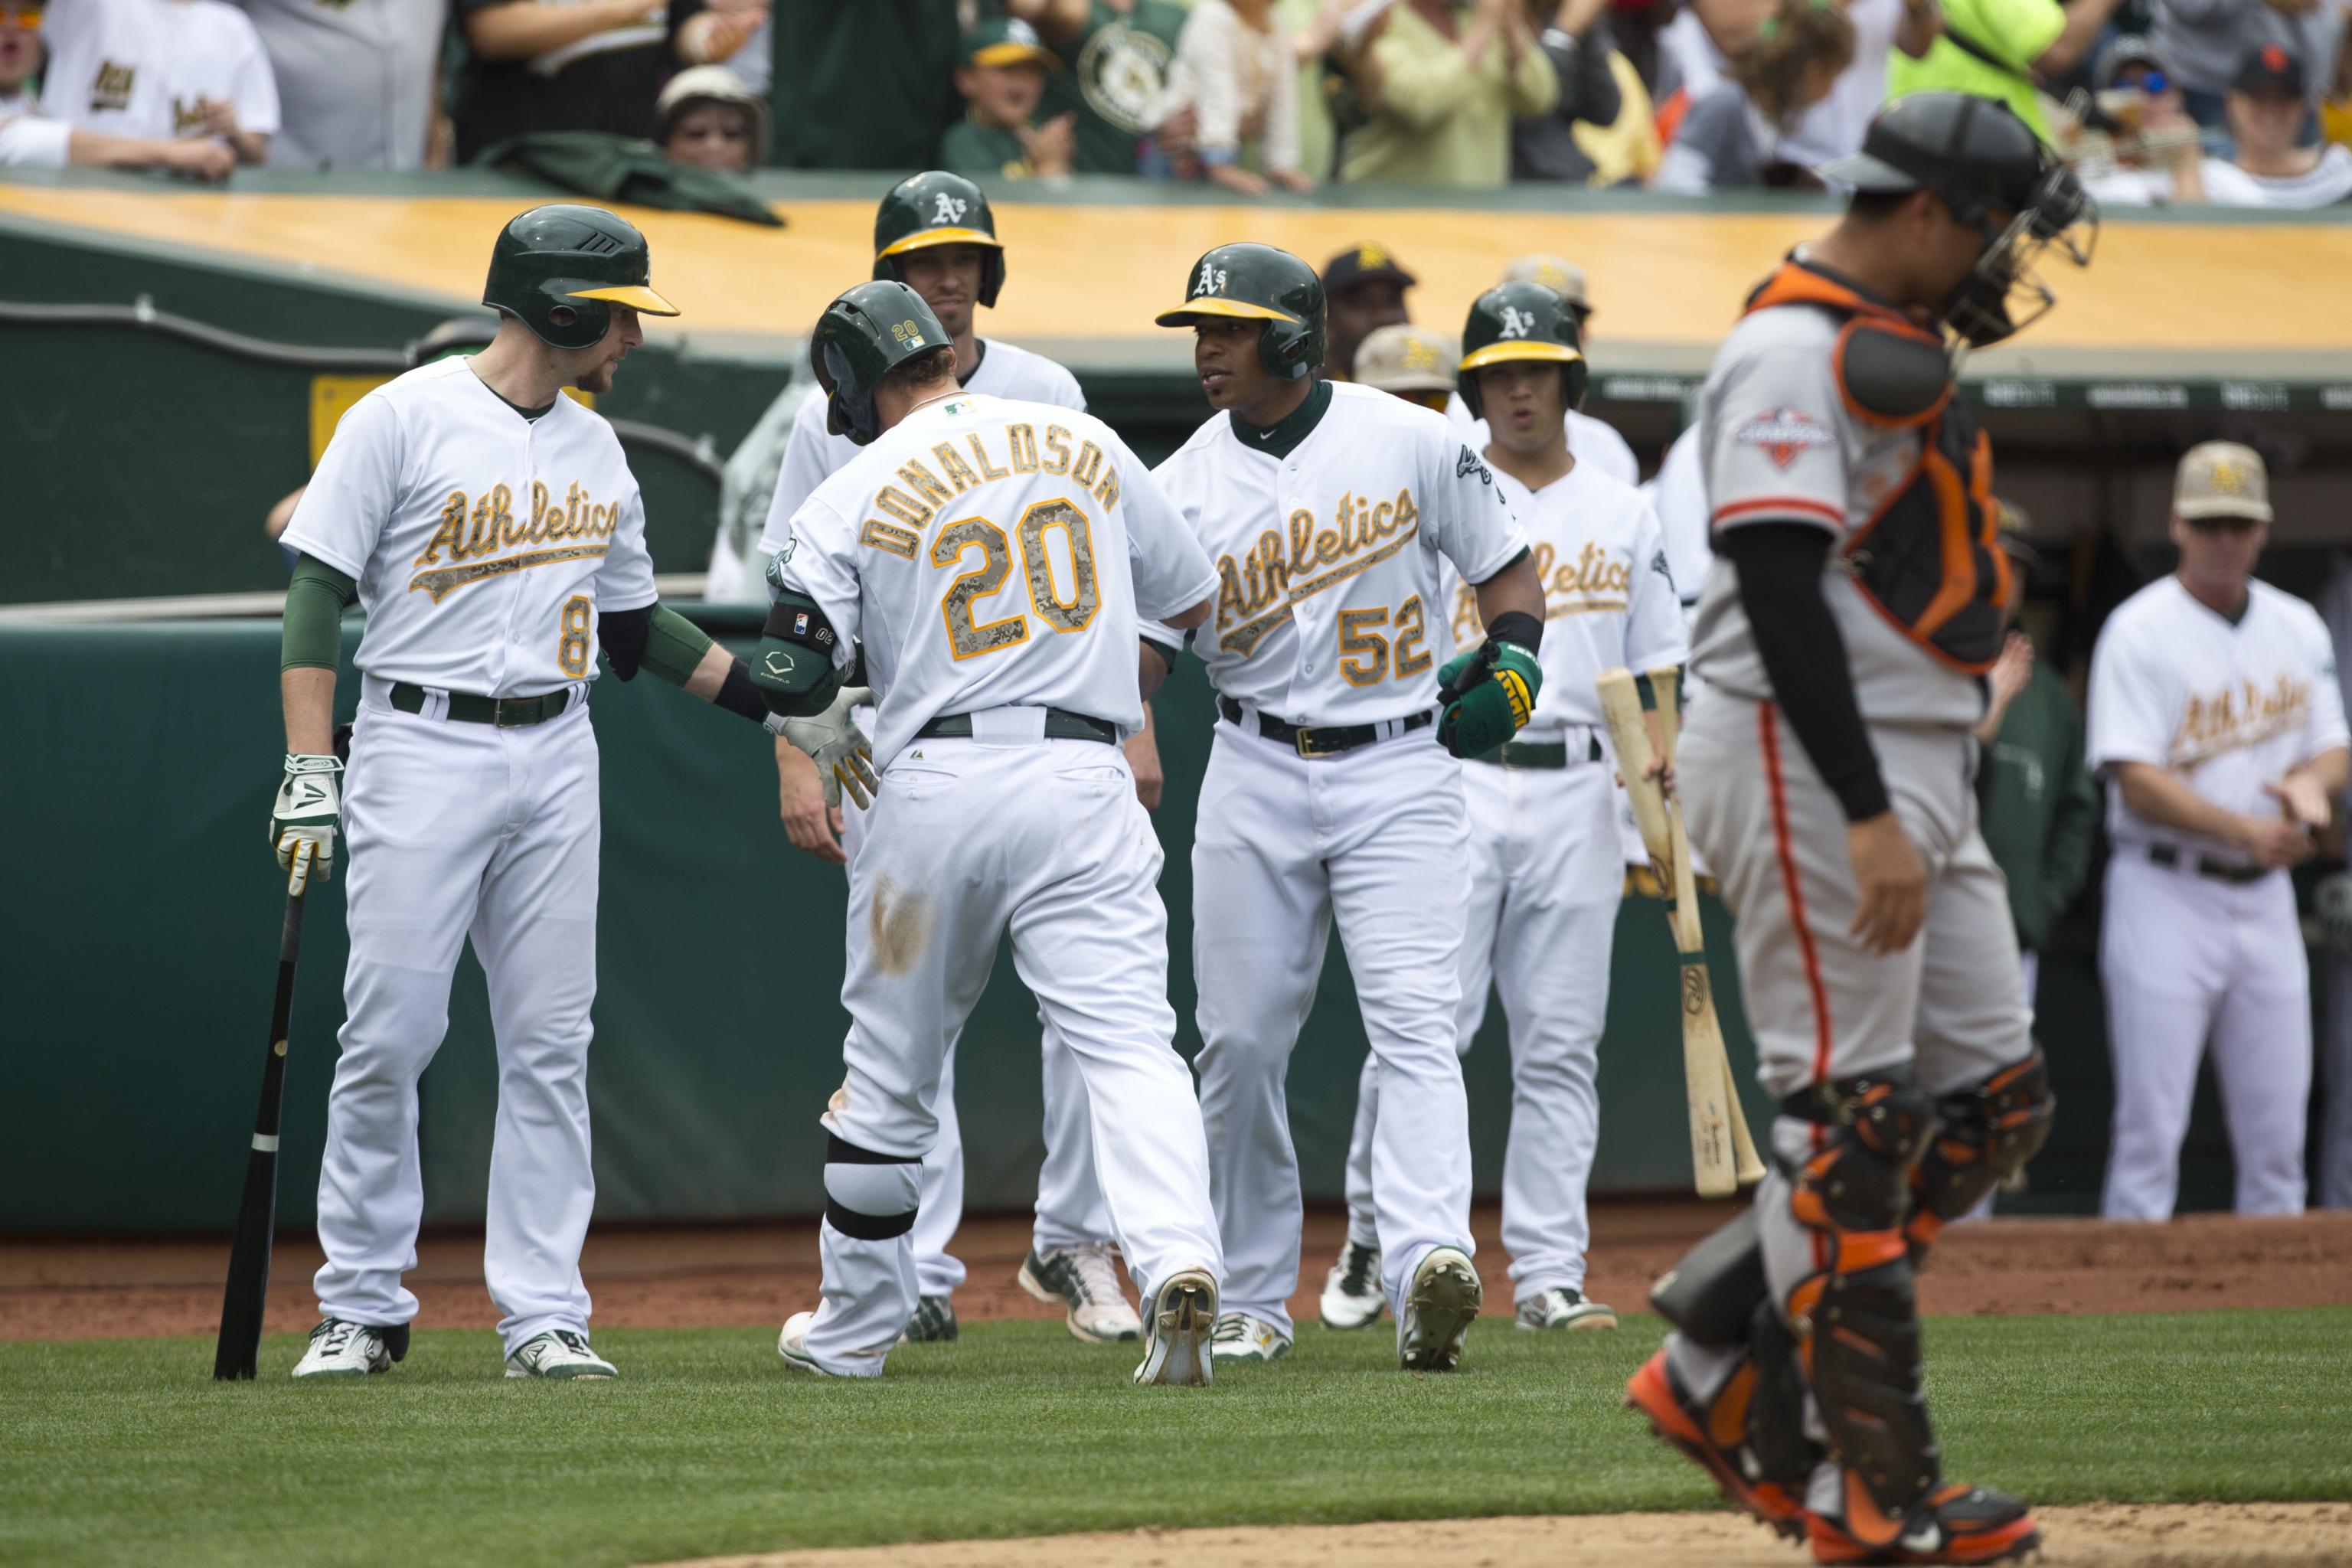 Giants, A's fans gain option to stream games on mobile apps